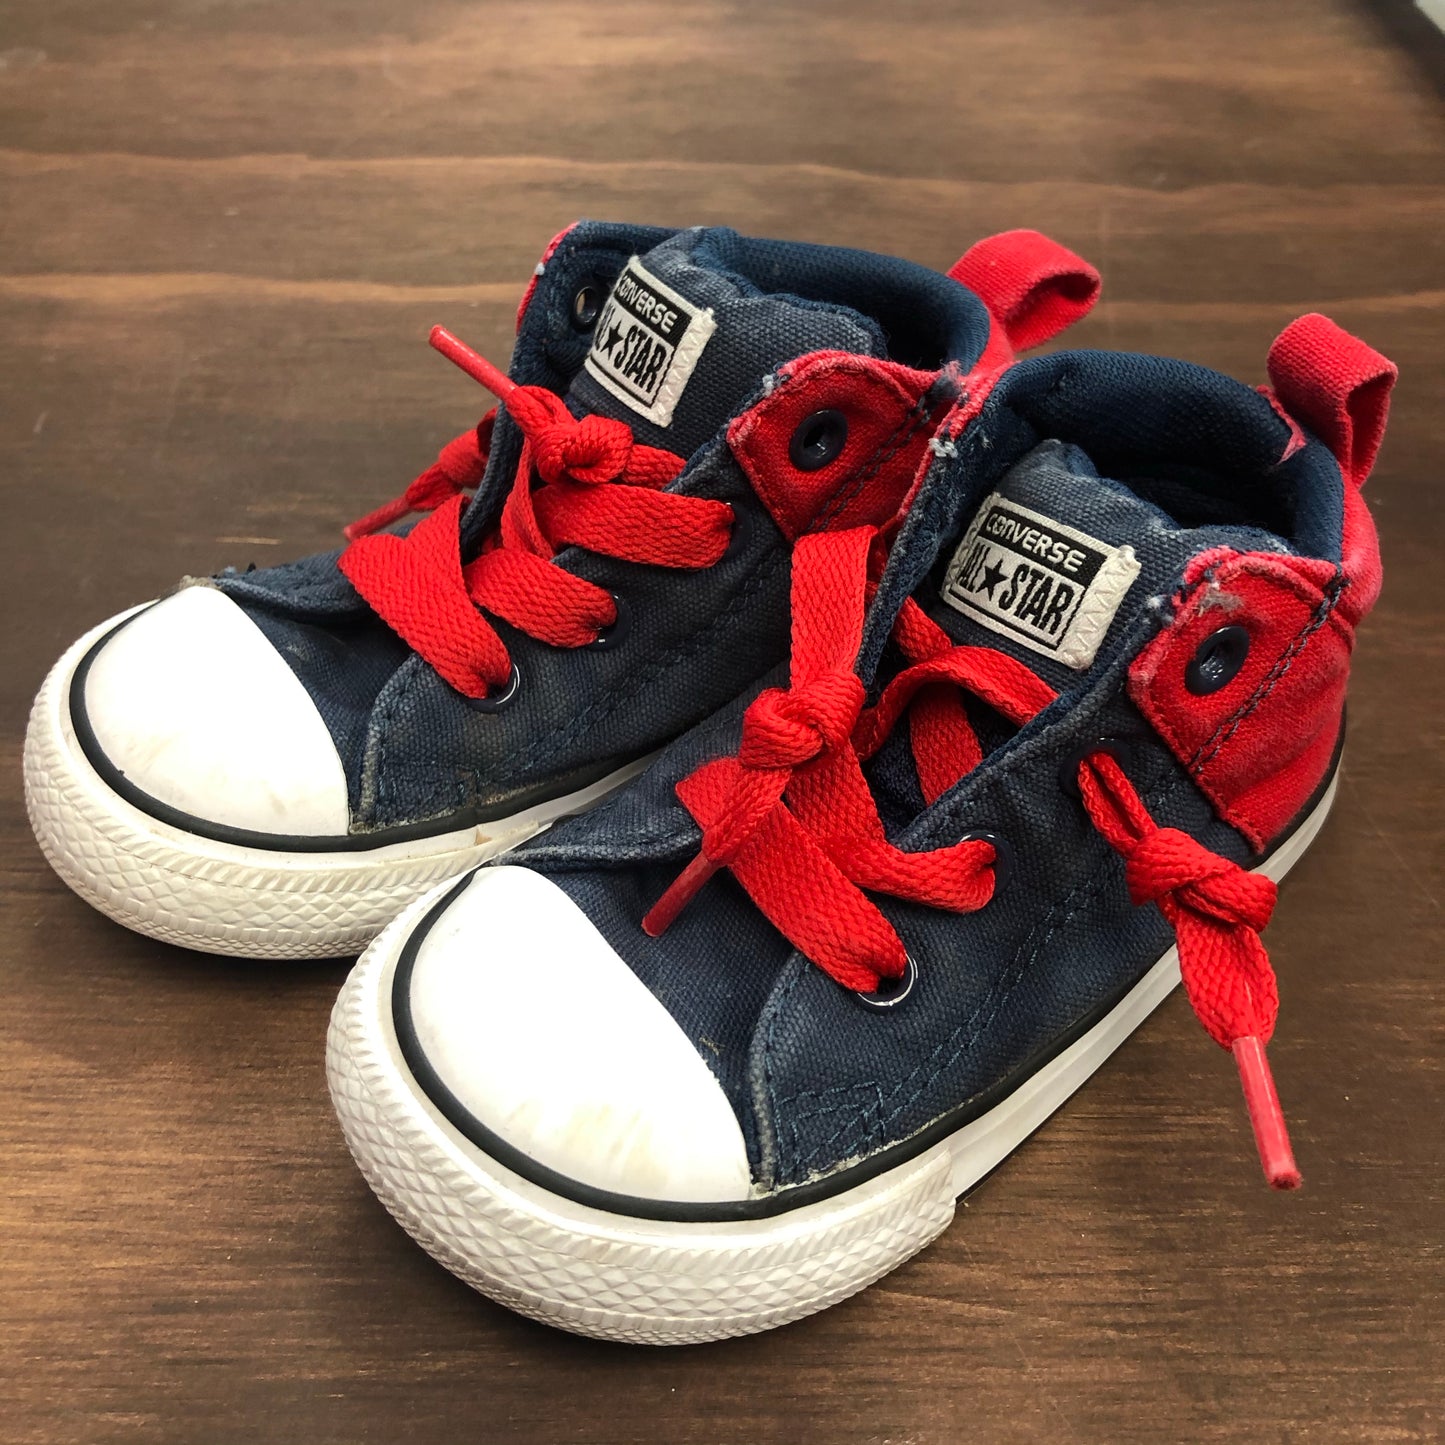 Blue & Red High Tops